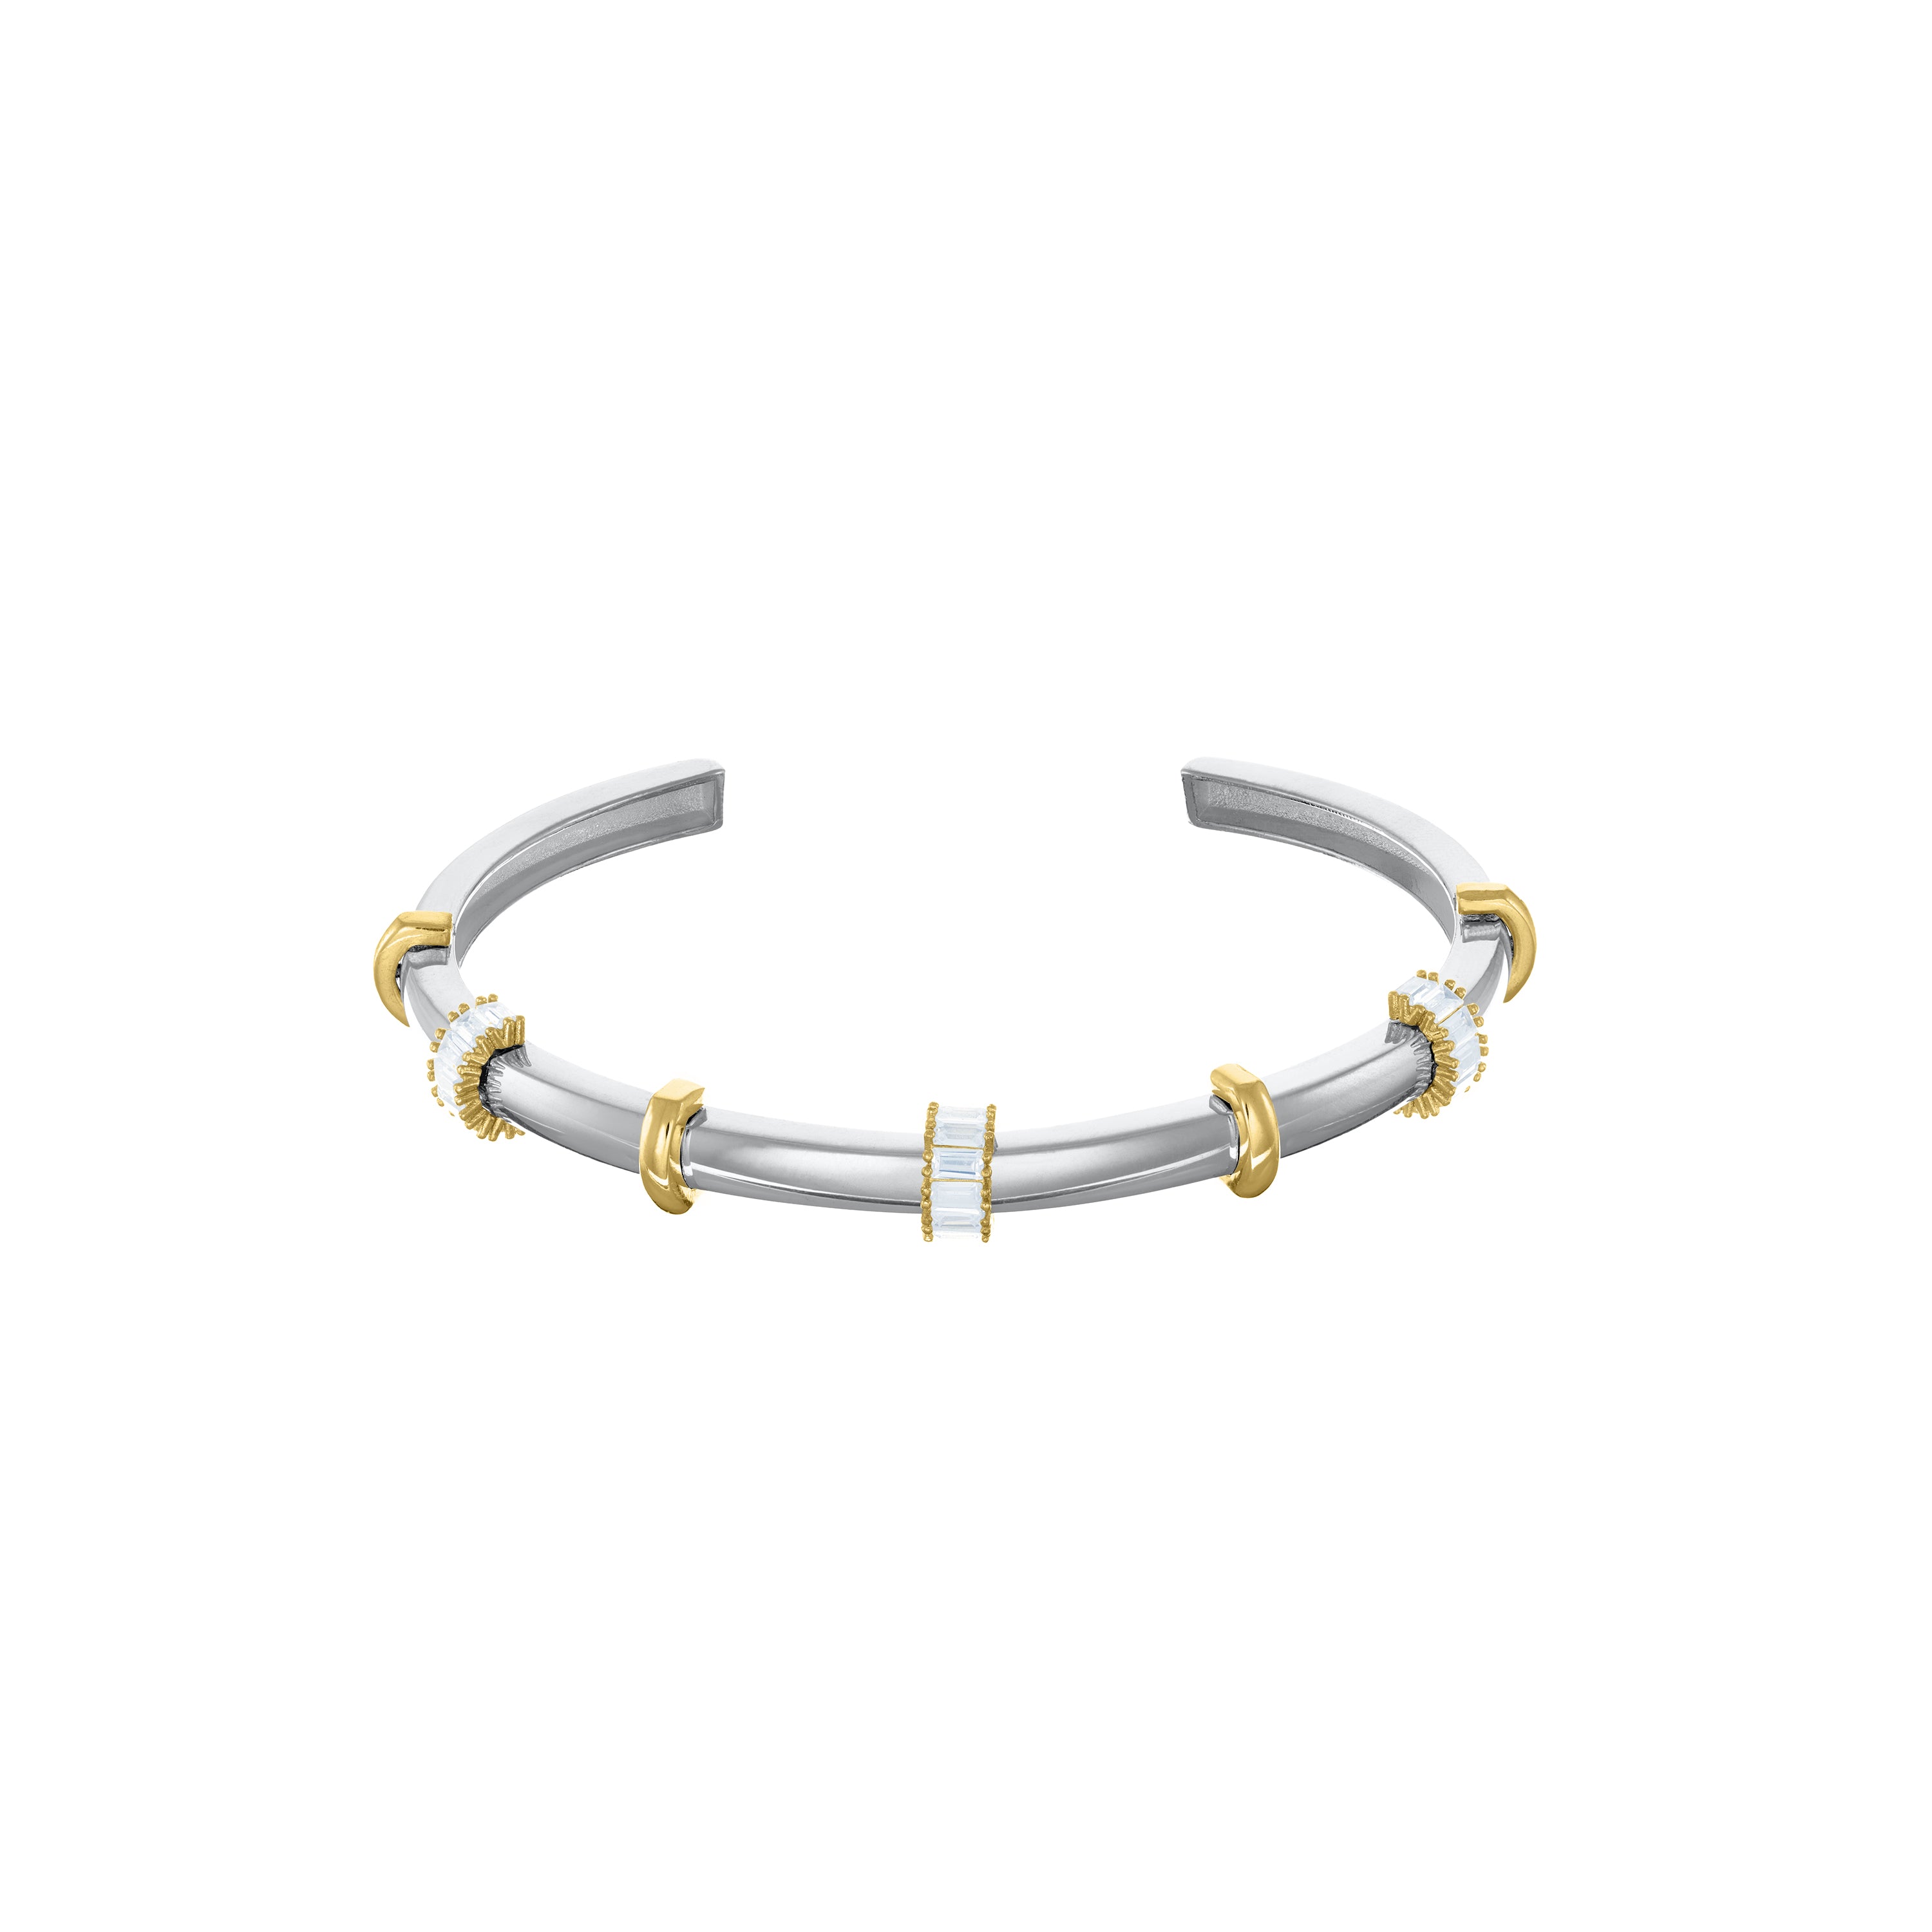 Evenly Spaced Cuff Bangle